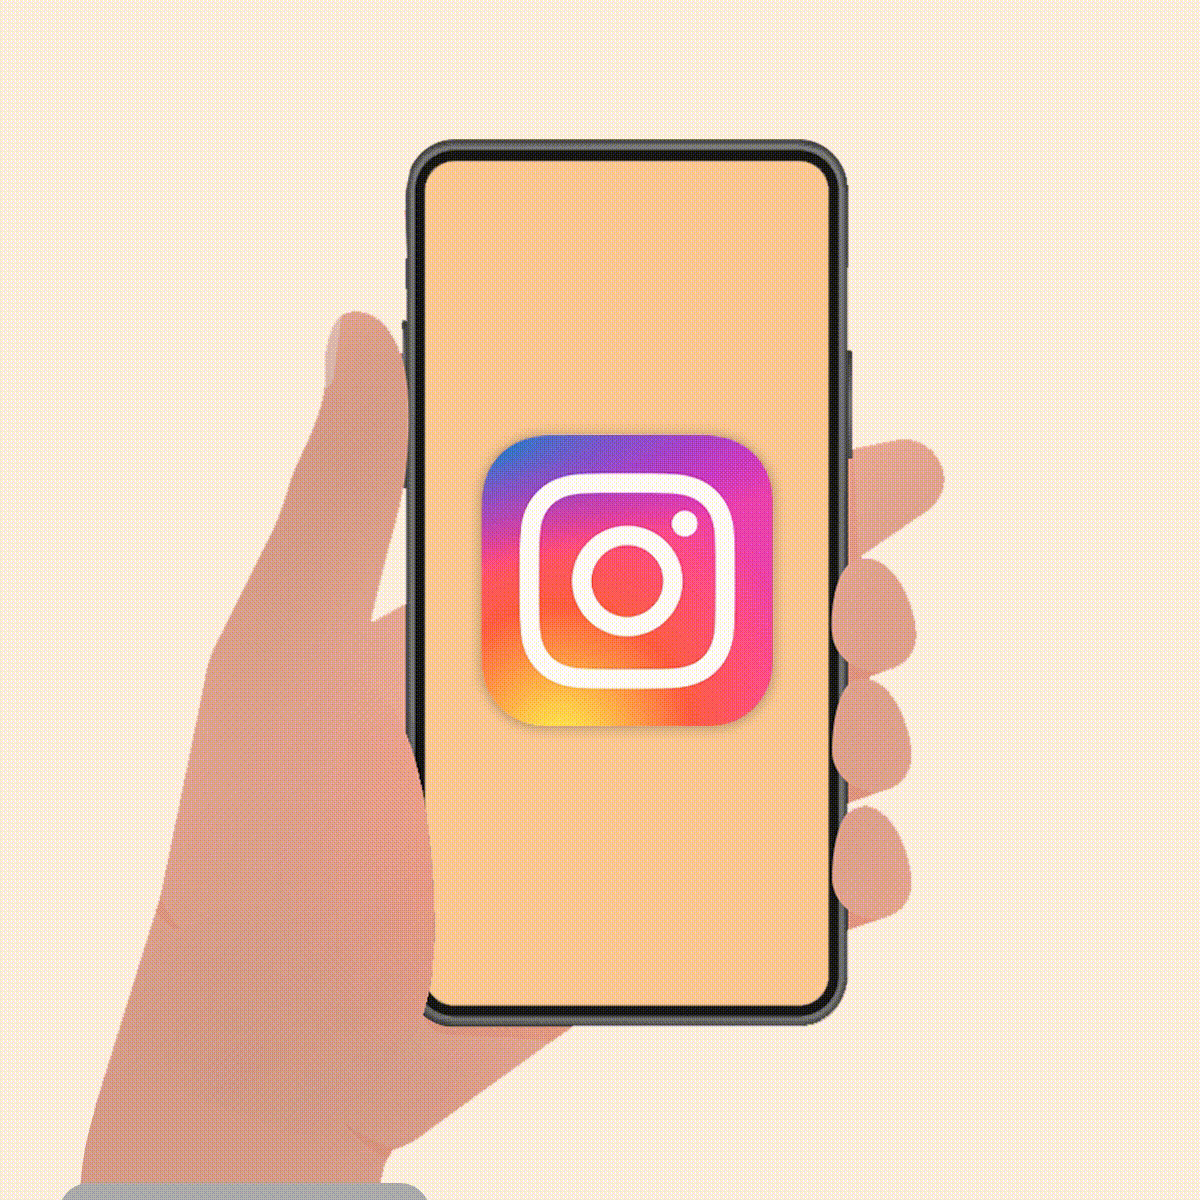 GIF On Instagram - How To Make A GIF Sticker On Social Media